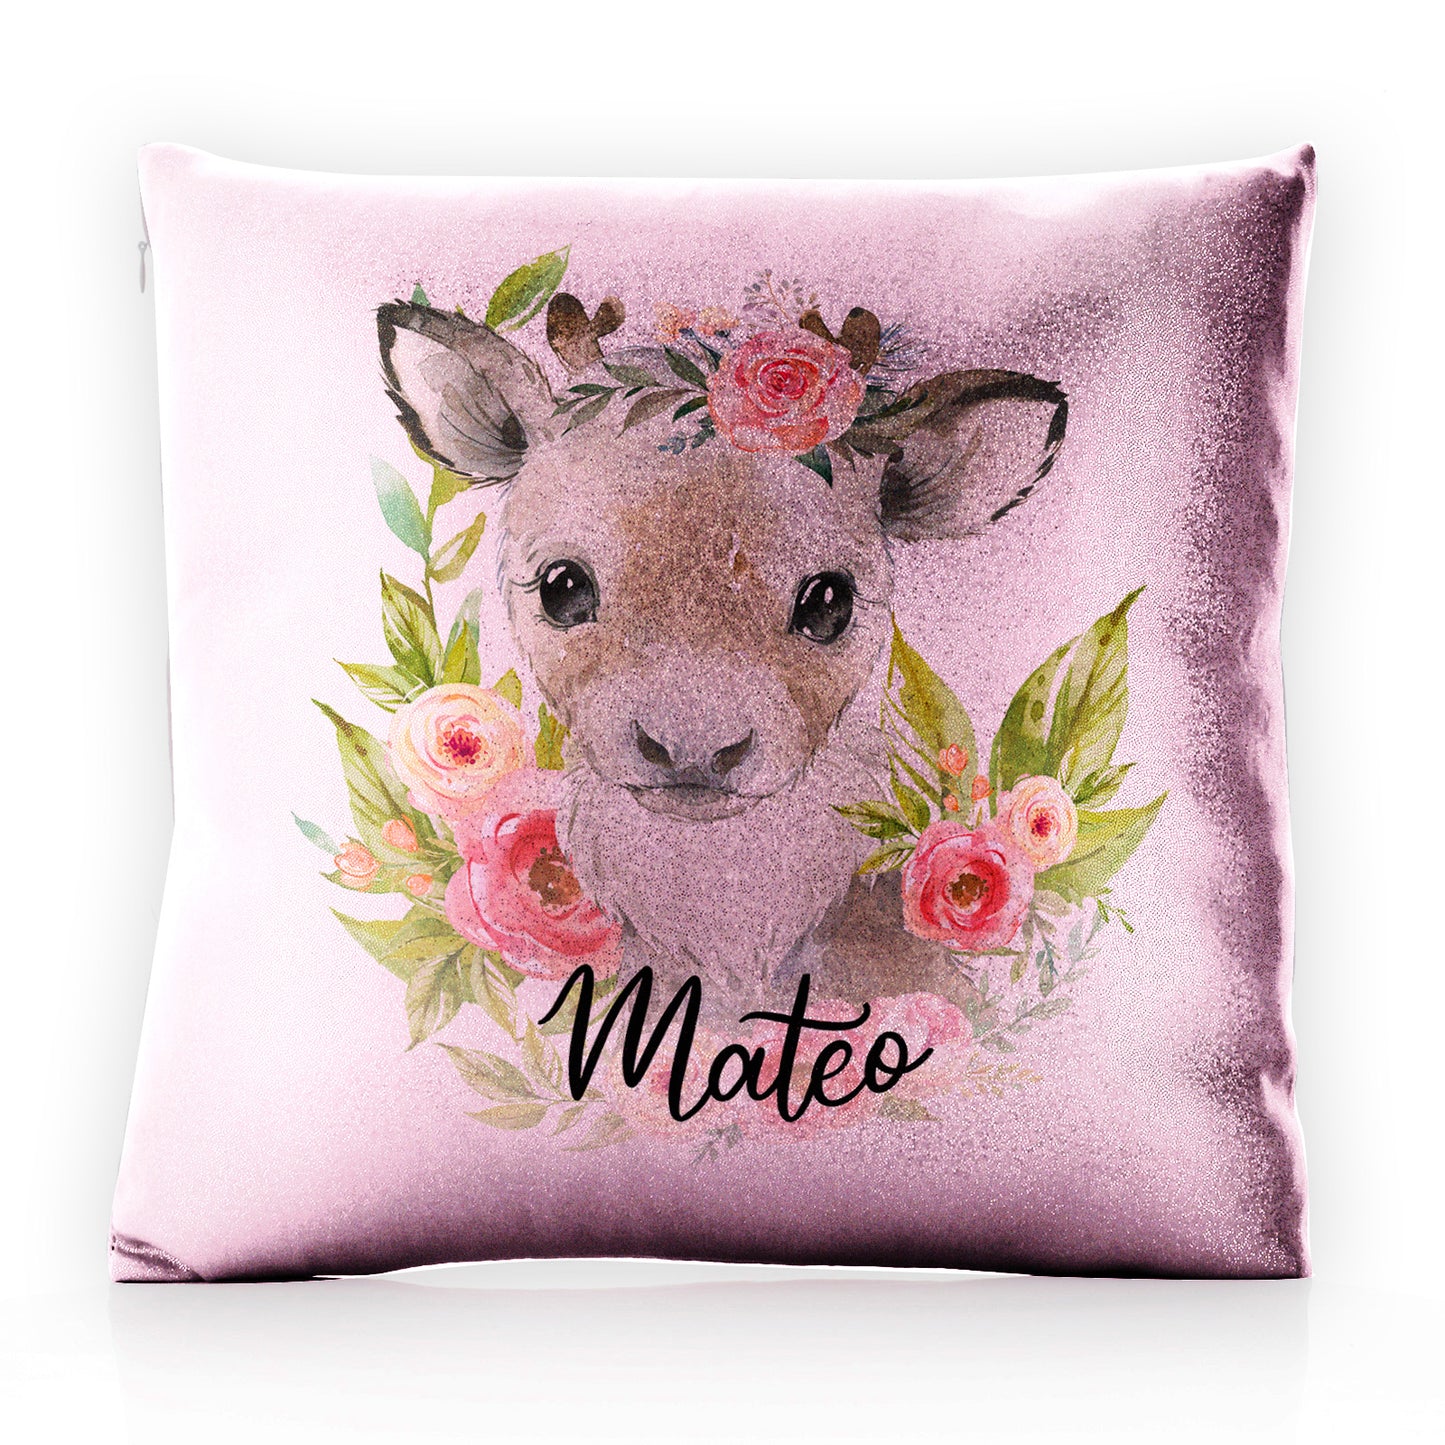 Personalised Glitter Cushion with Reindeer Pink Flowers and Cute Text